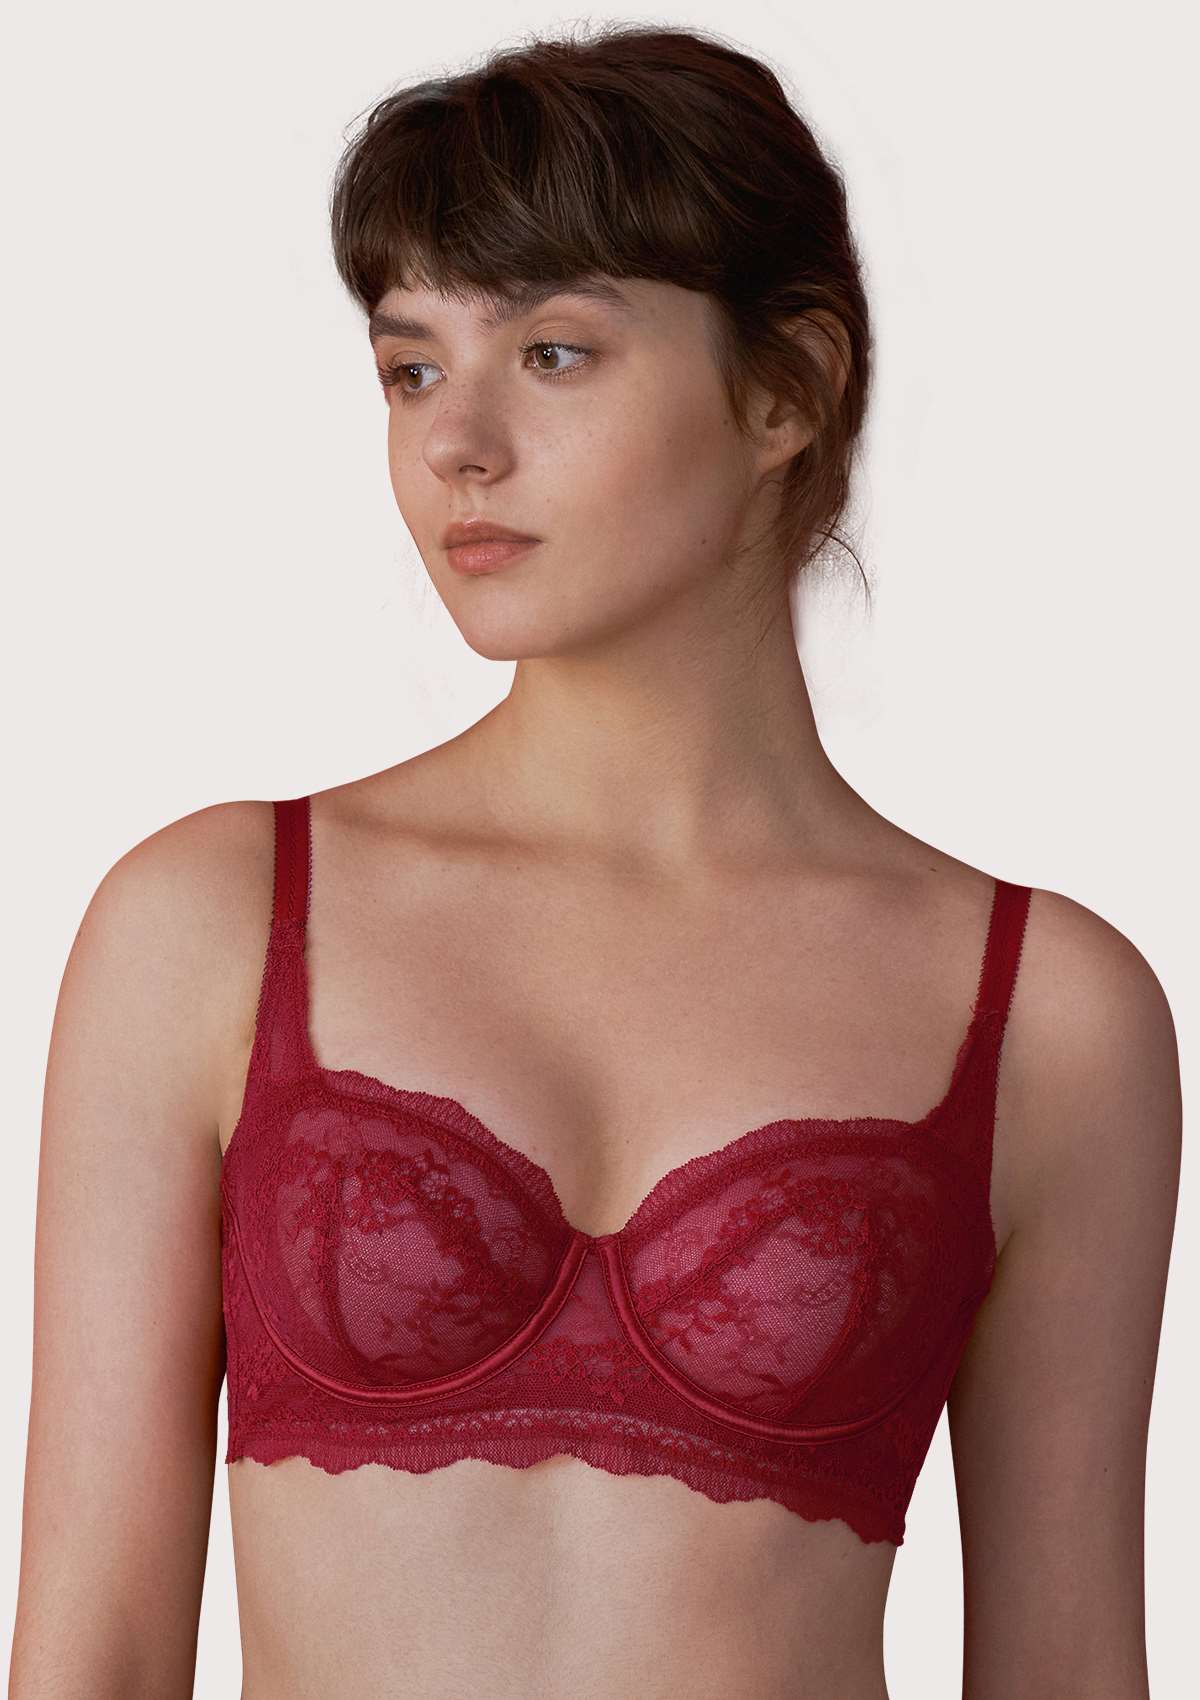 HSIA Floral Lace Unlined Bridal Balconette Bra Set - Supportive Classic - Burgundy / 38 / DD/E